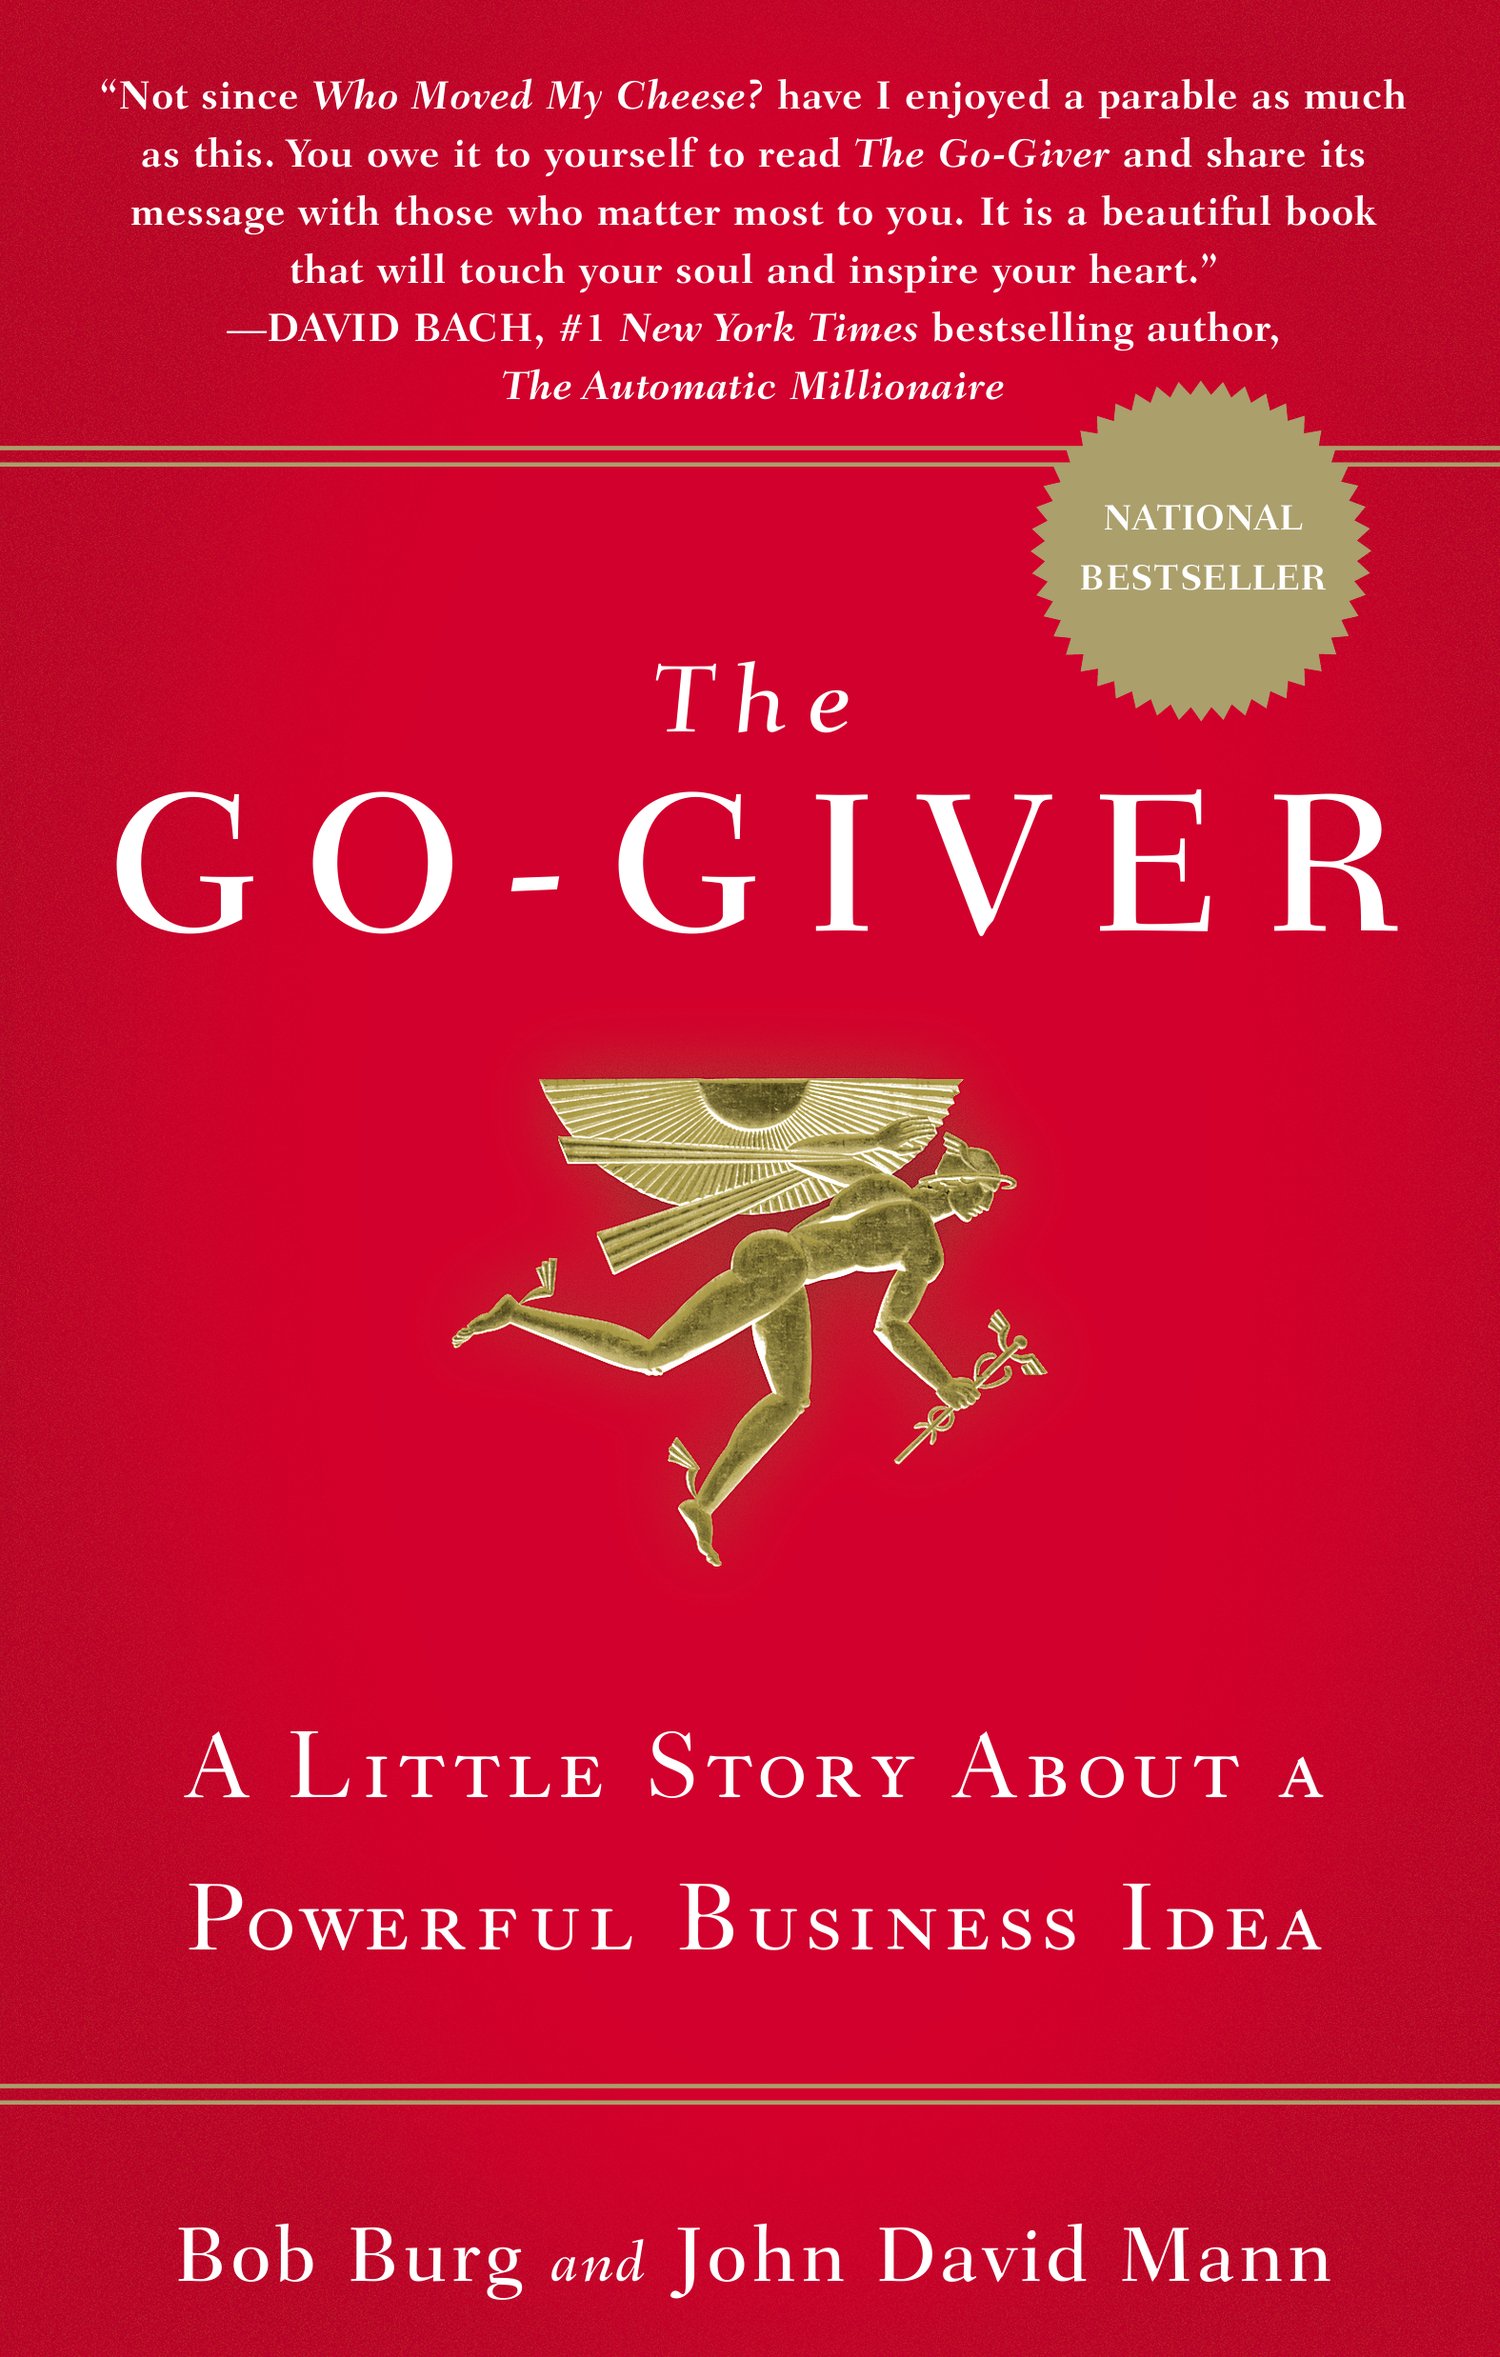 The Go-Giver: A Little Story About a Powerful Business Idea by Bob Burg